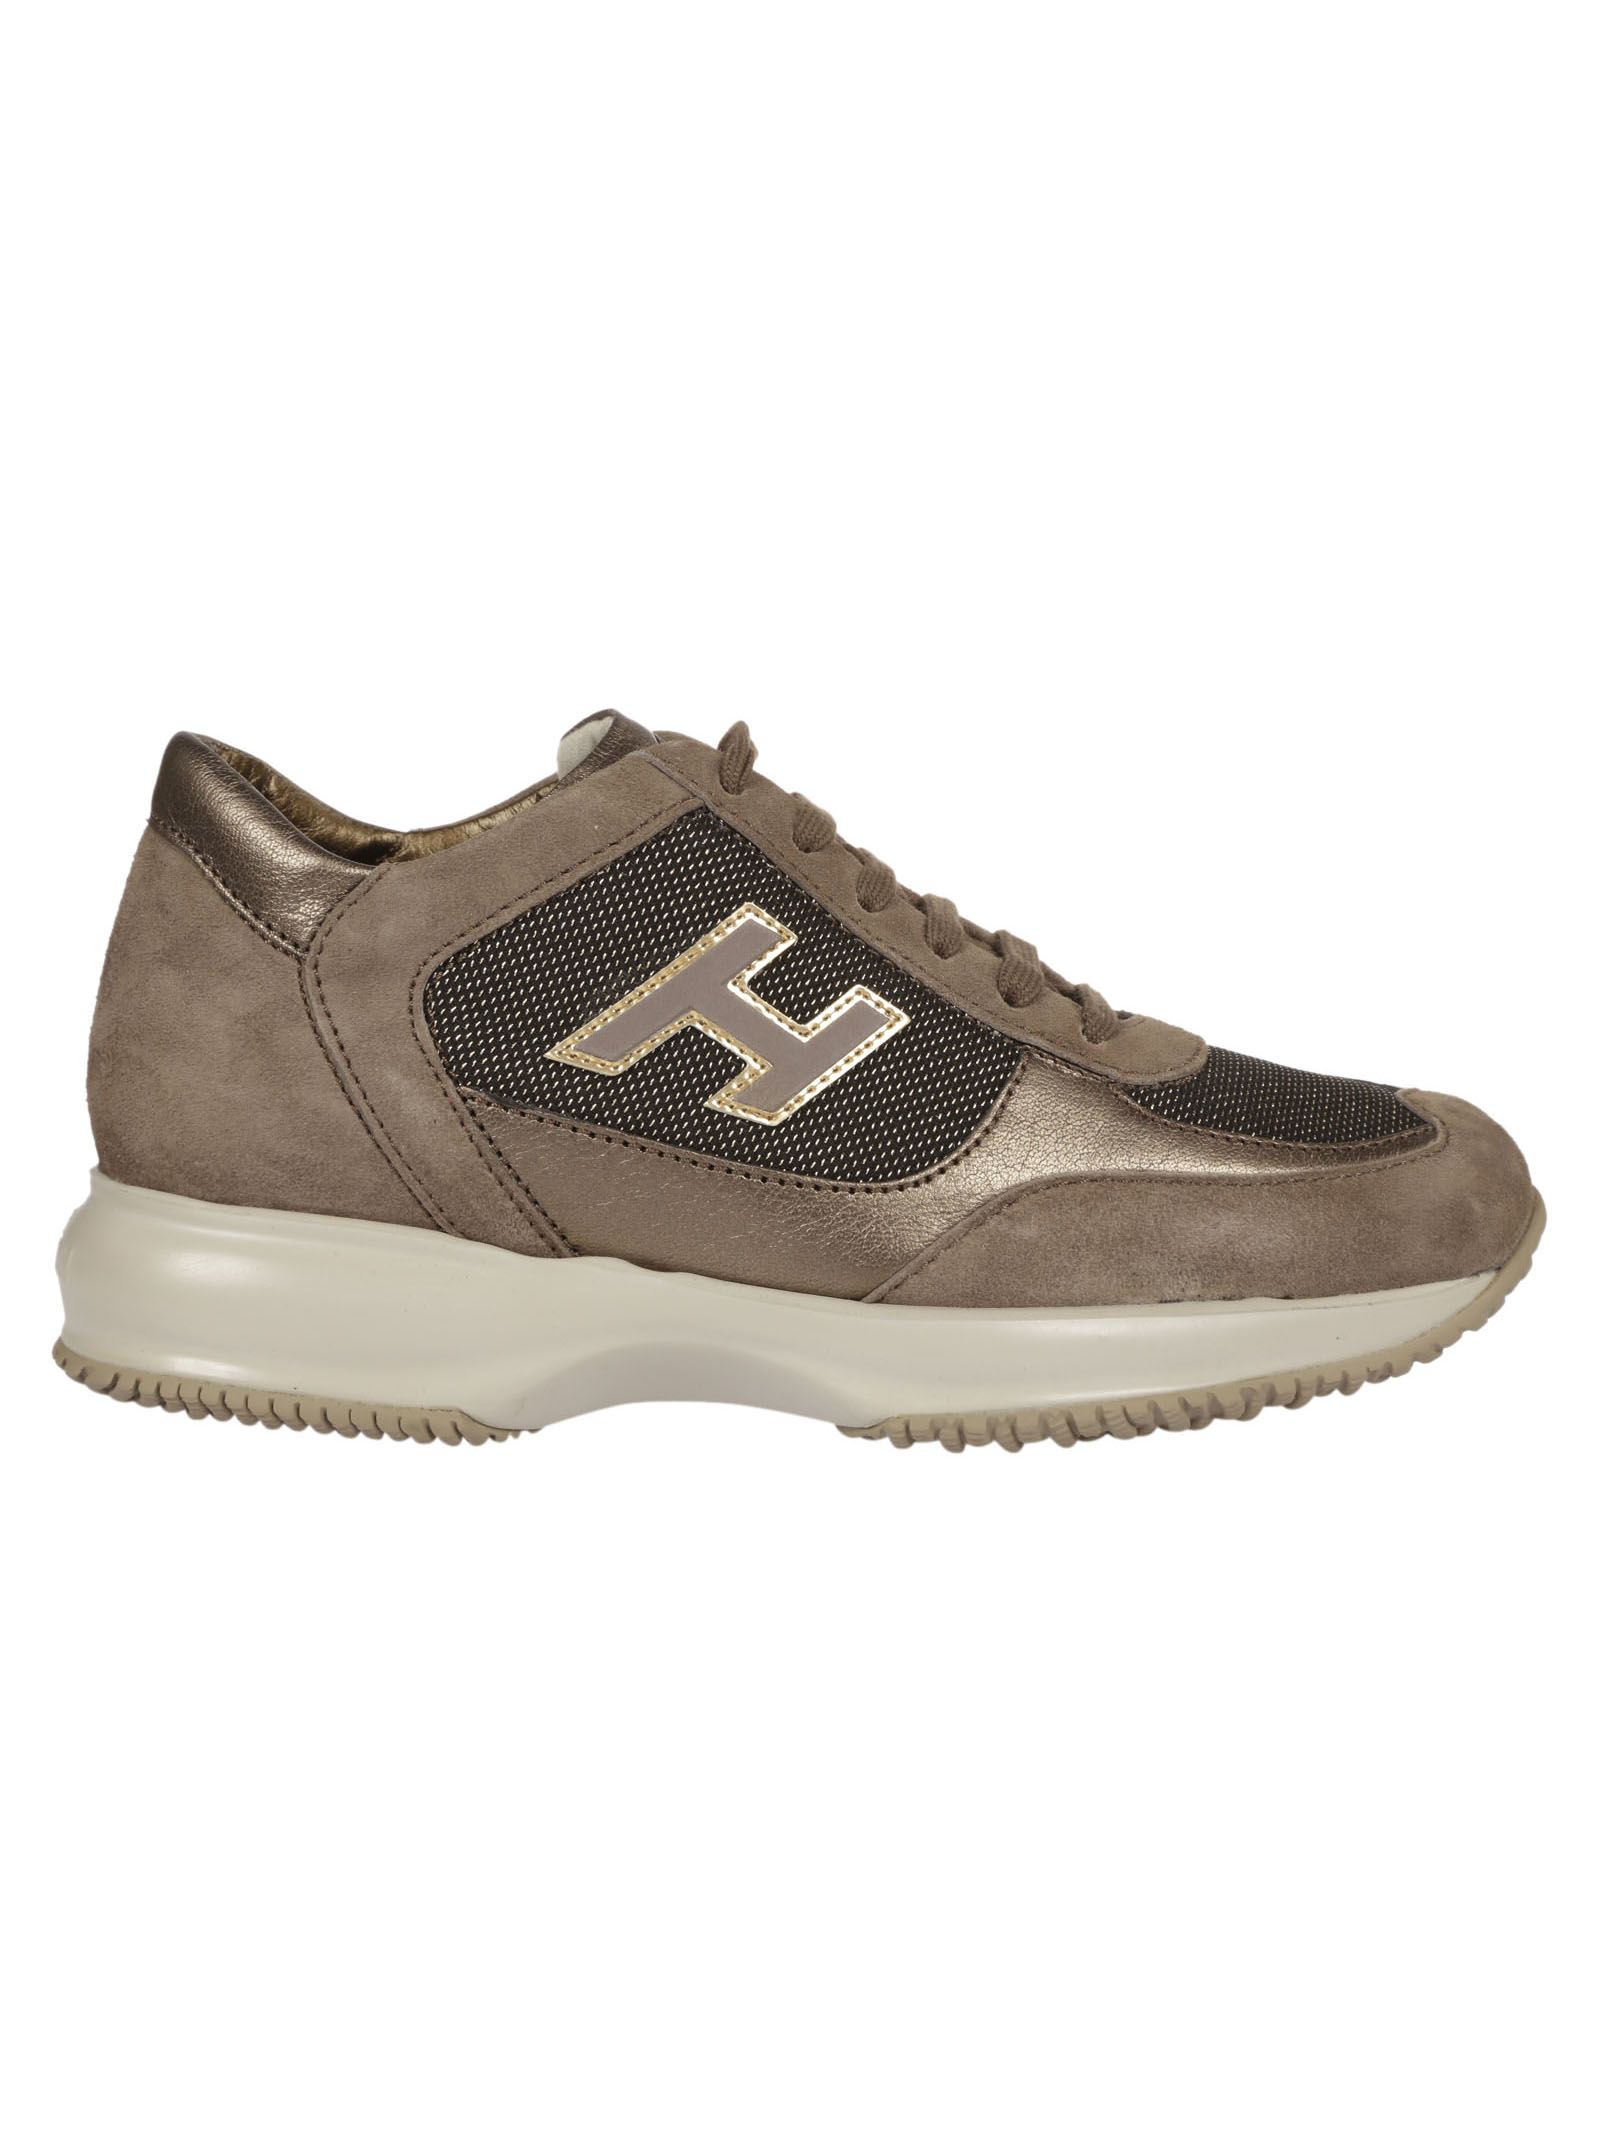 Hogan Women'S Shoes Suede Trainers Sneakers Interactive H Flock In ...